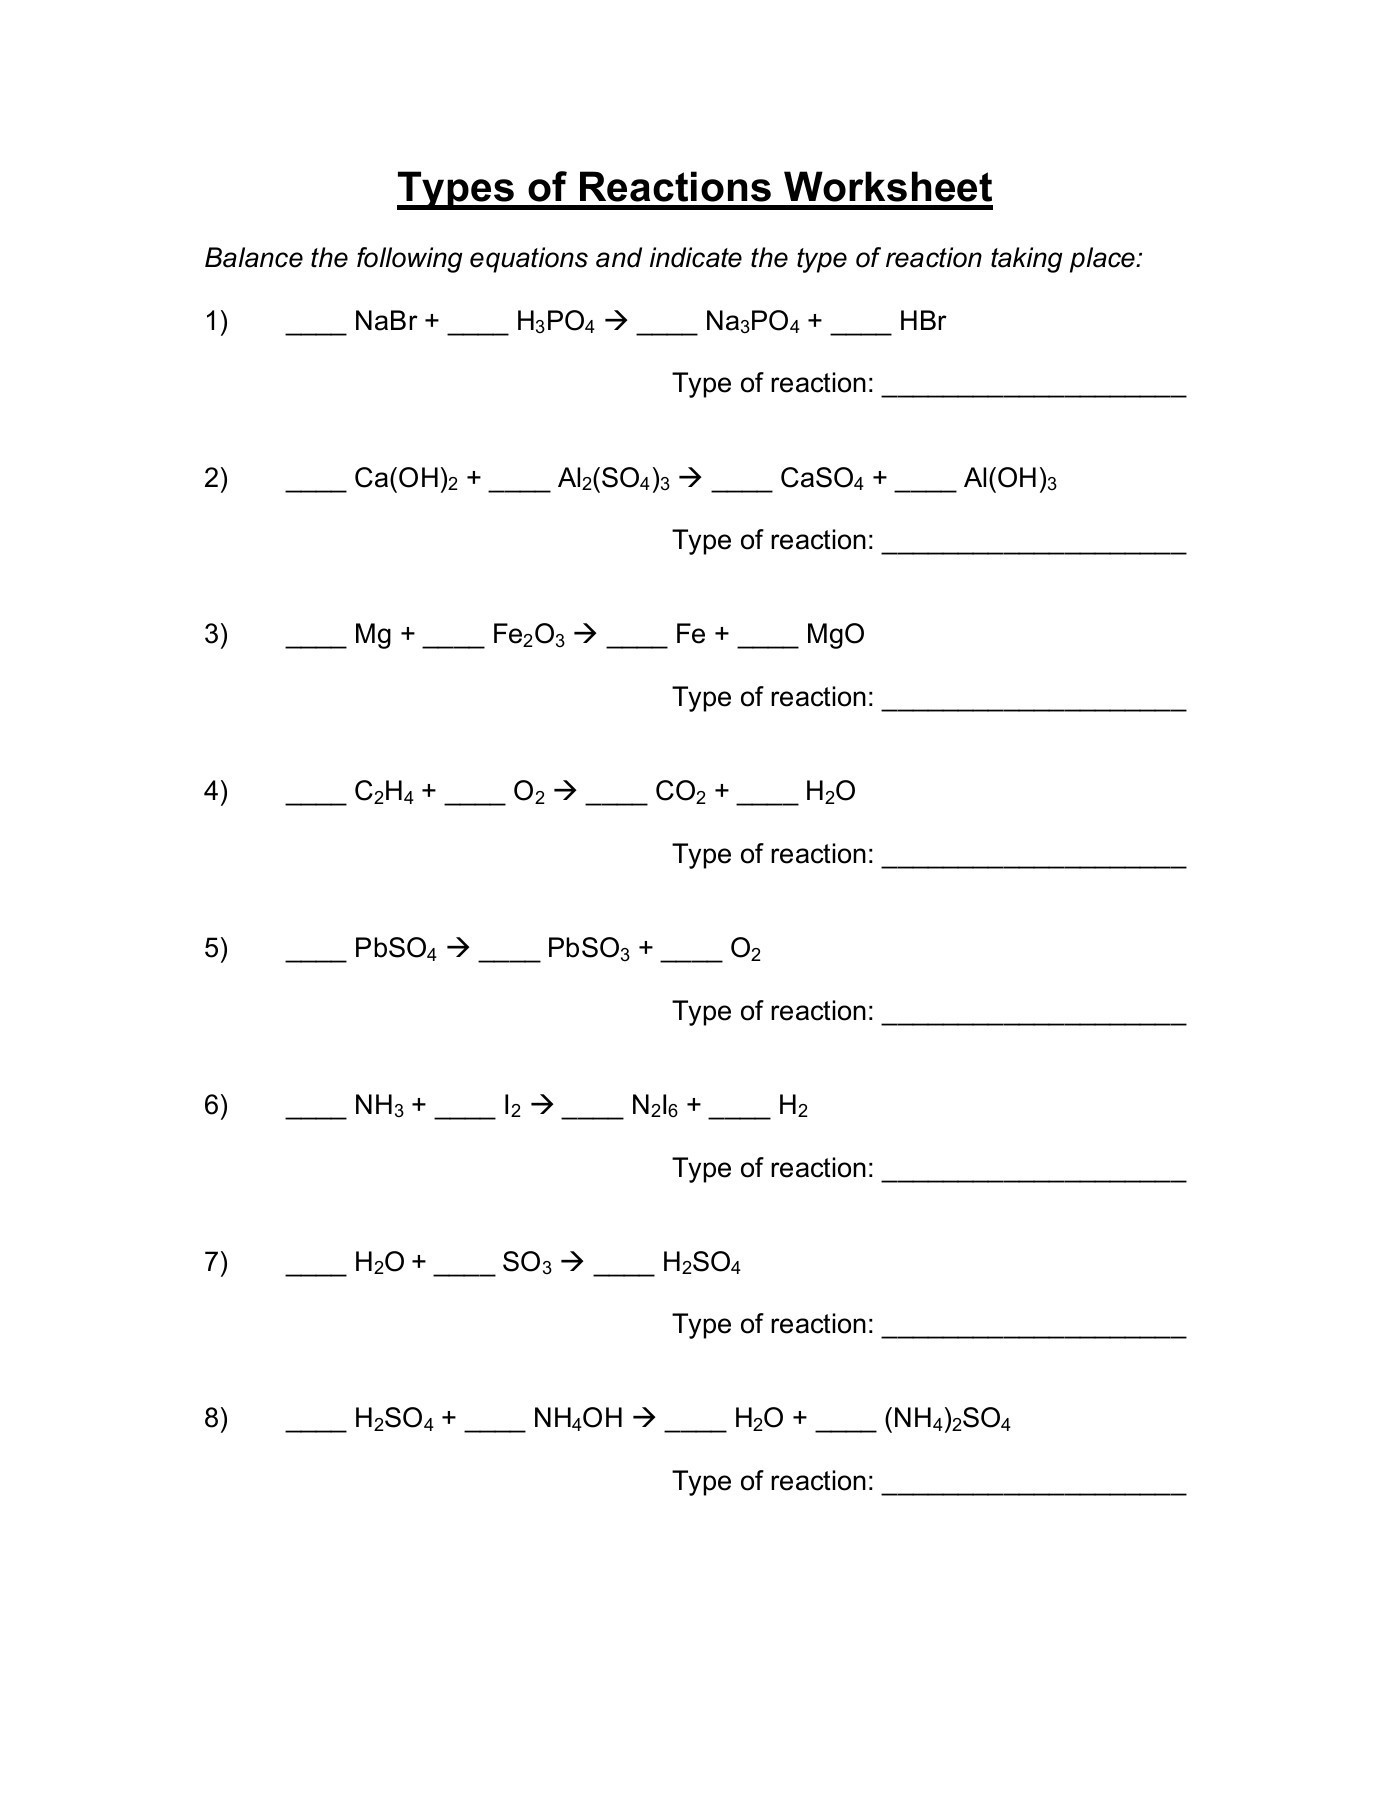 Types Of Reactions Worksheet Dalton Pages 1 2 Text Version